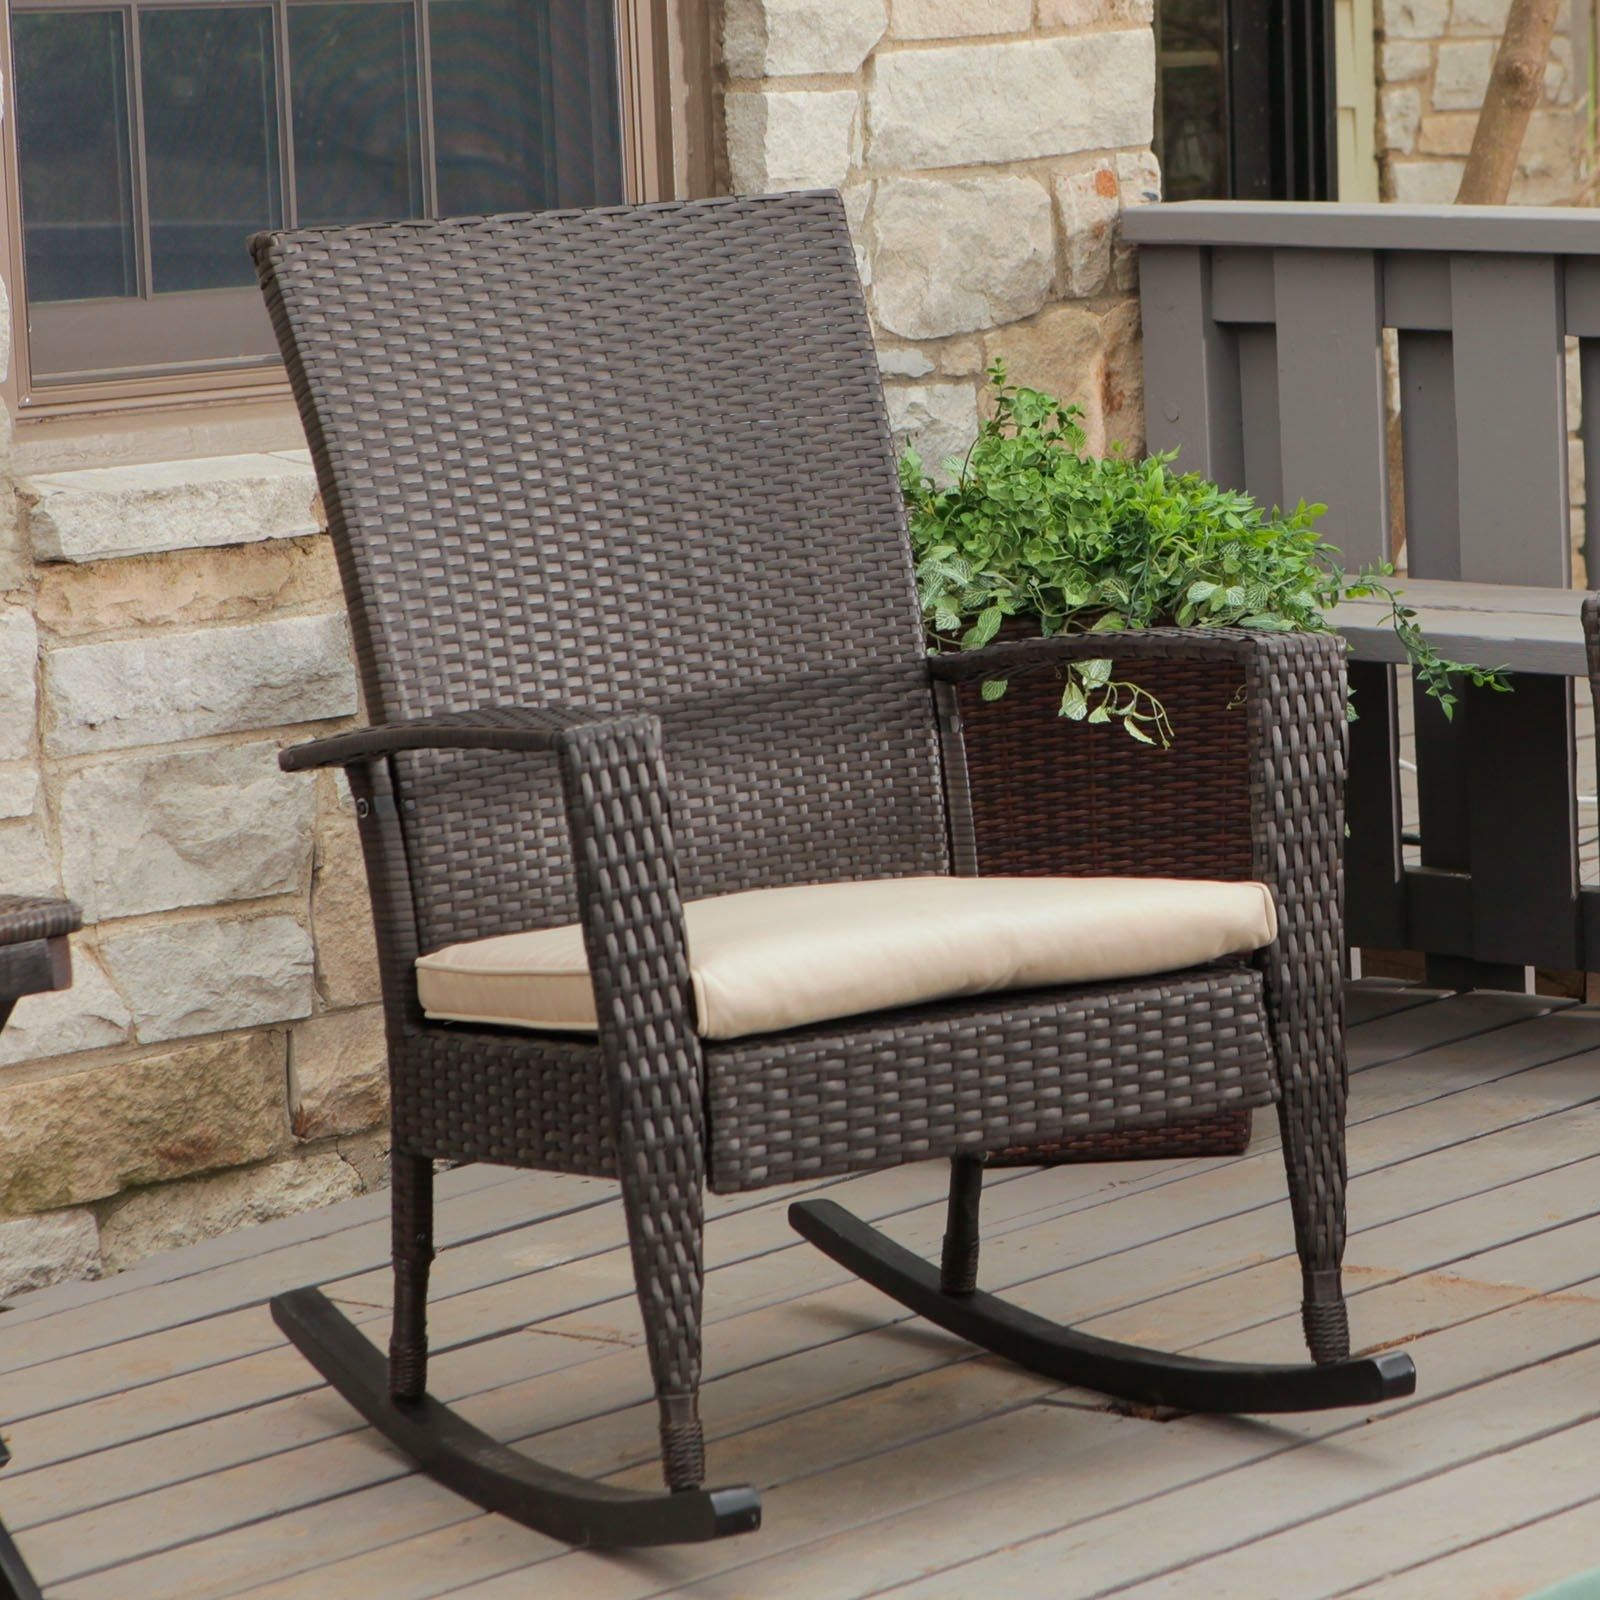 Resin Patio Rocking Chairs : Spectacular And Sensational Patio Intended For Plastic Patio Rocking Chairs (View 15 of 15)